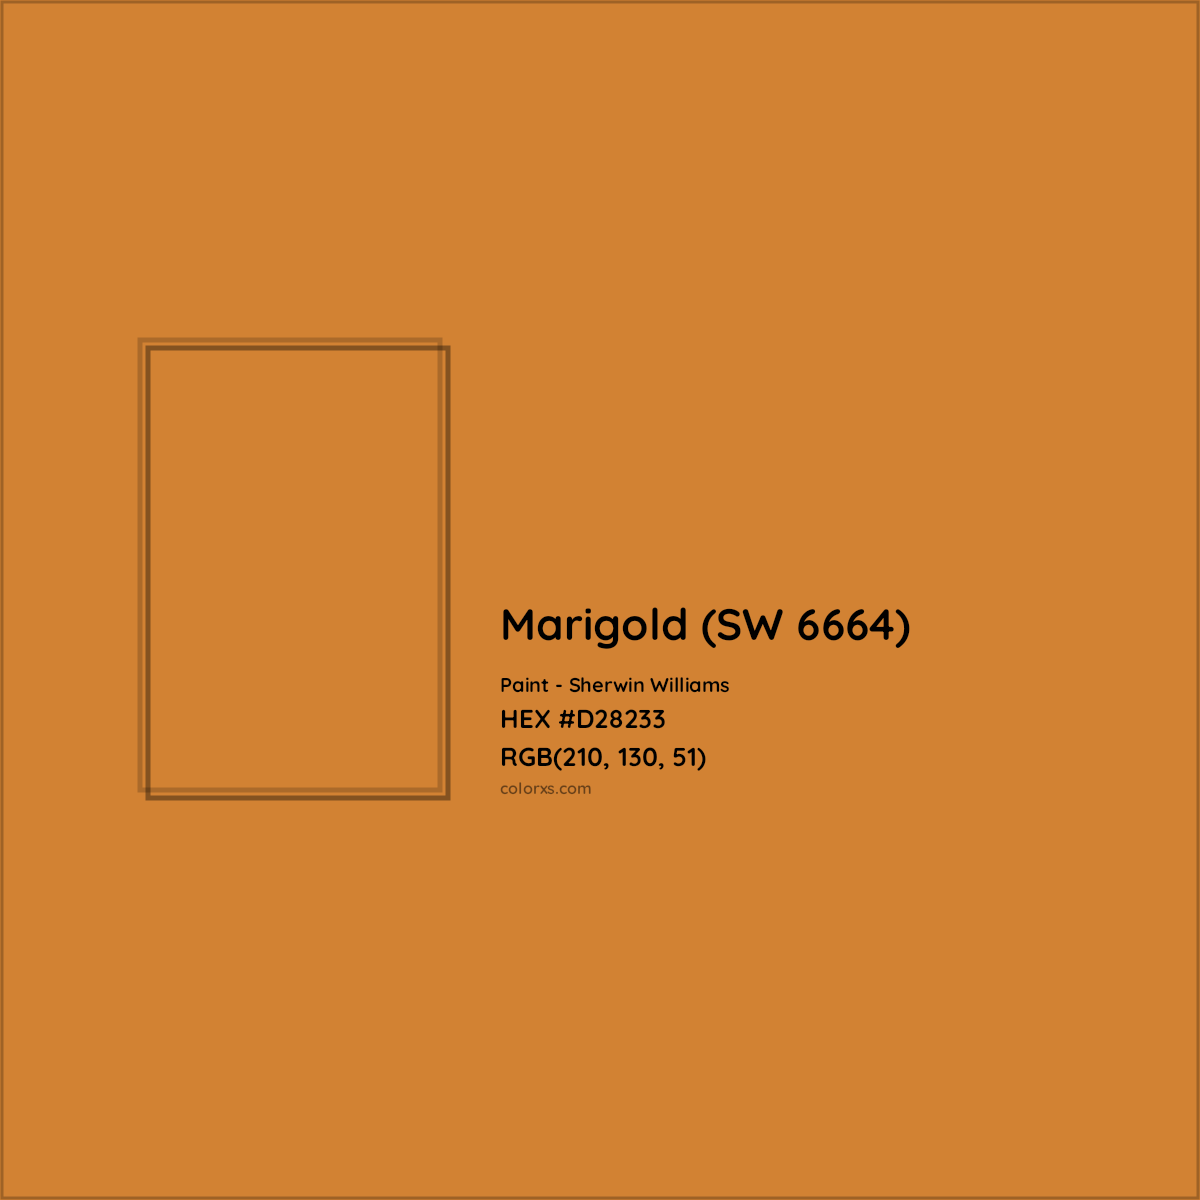 HEX #D28233 Marigold (SW 6664) Paint Sherwin Williams - Color Code